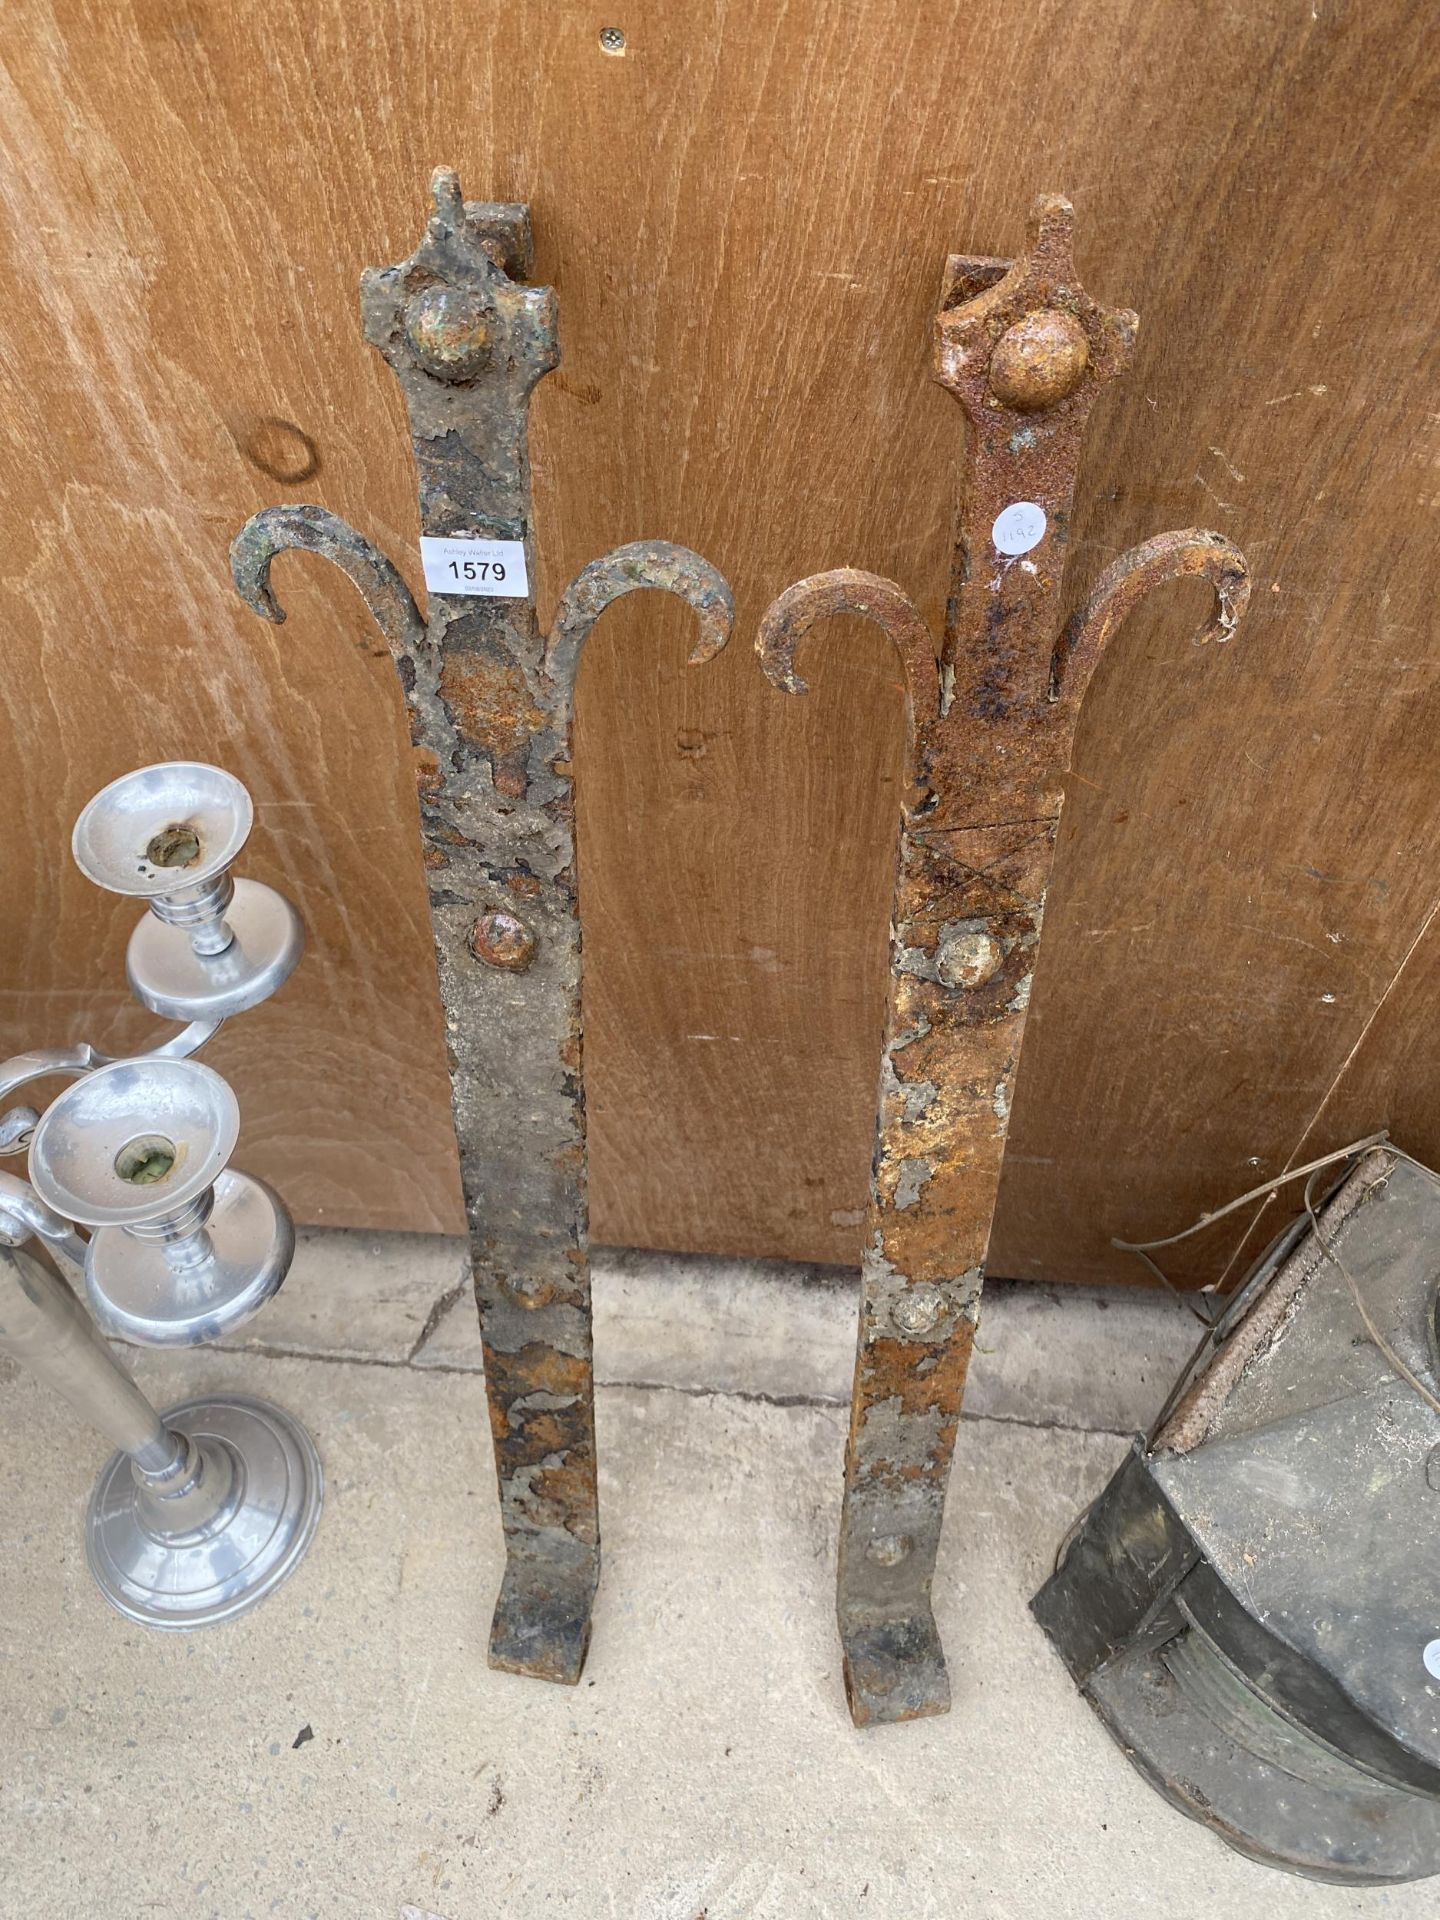 A PAIR OF HEAVY AND DECORATIVE WROUGHT IRON GATE HINGES